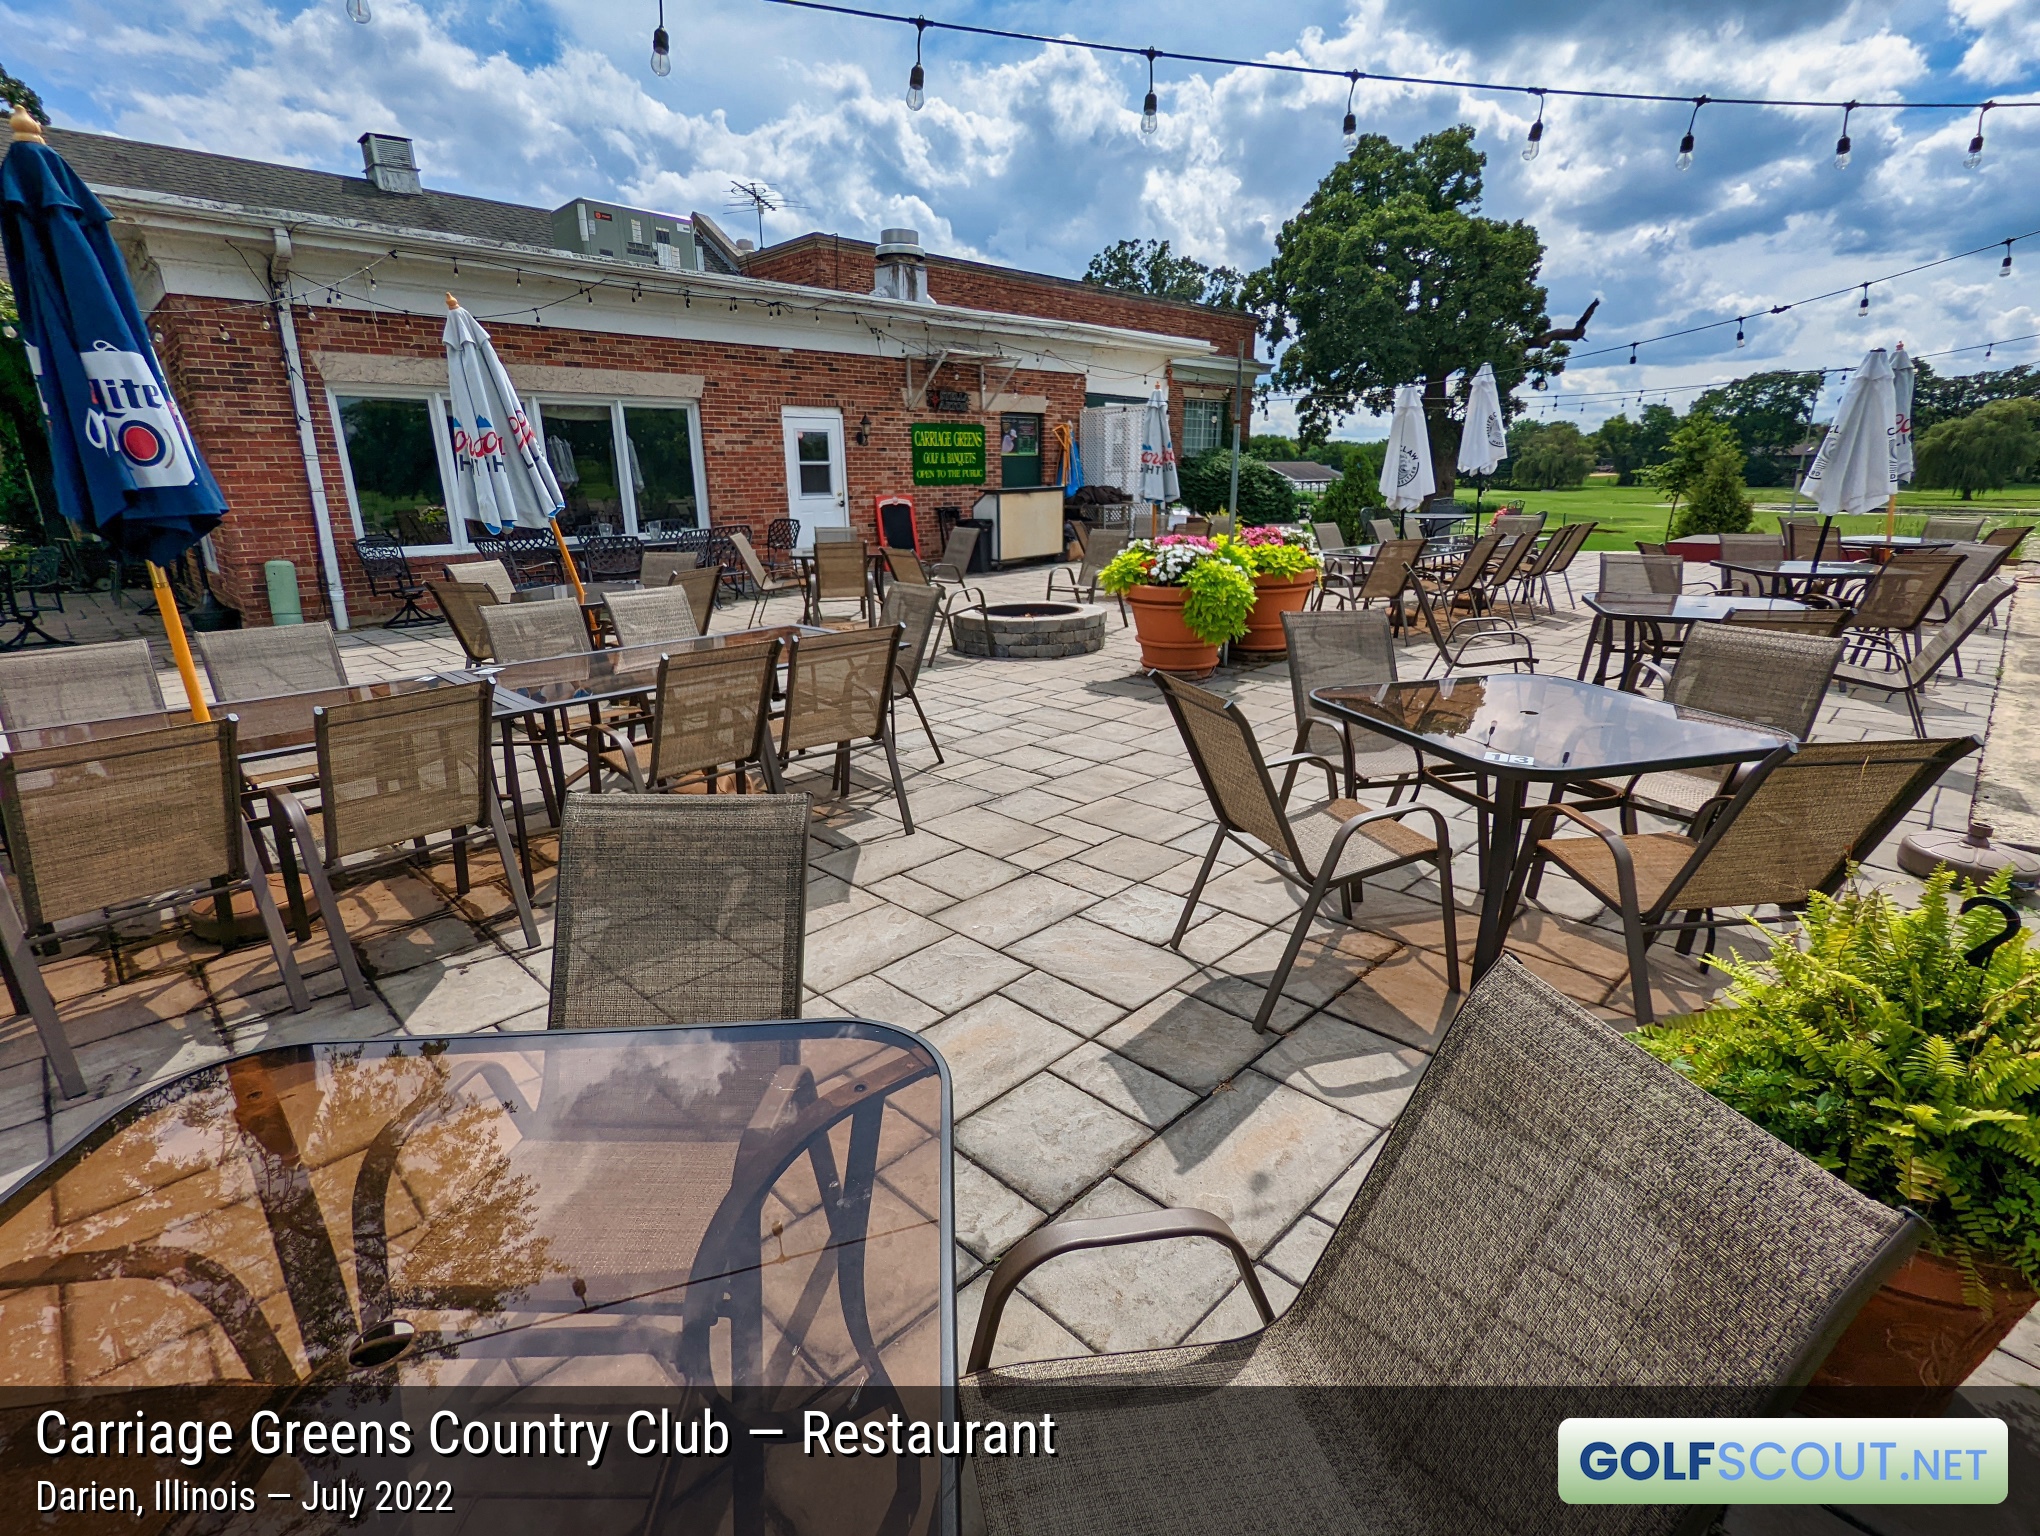 Photo of the restaurant at Carriage Greens Country Club in Darien, Illinois. The patio was installed in 2020.